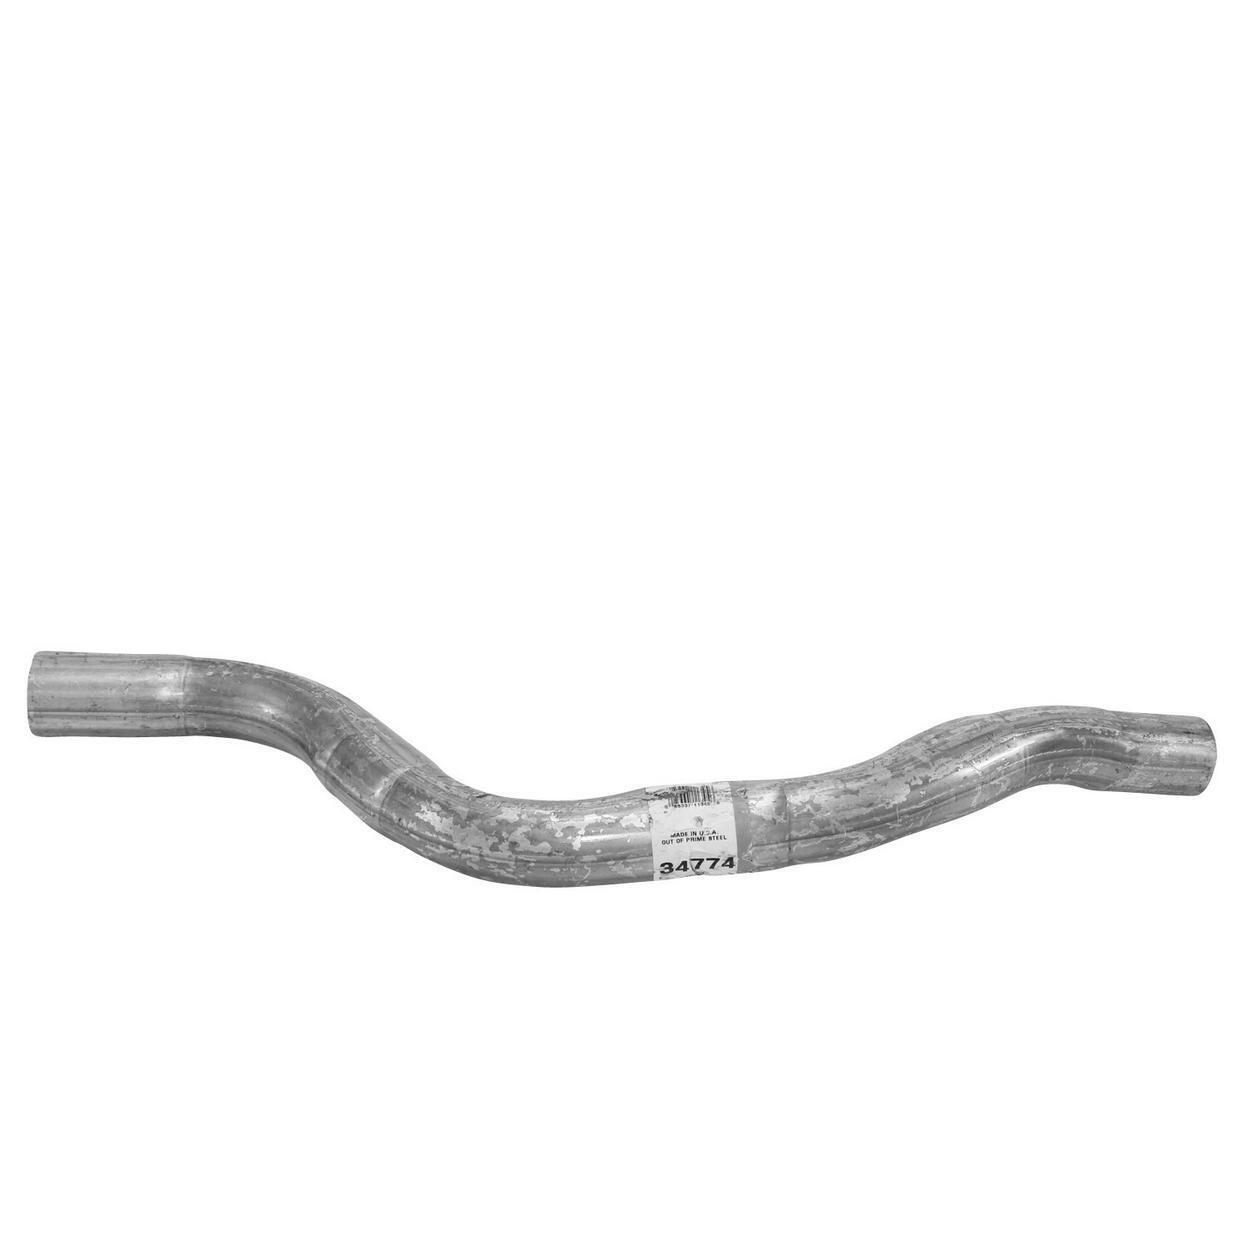 34774-BC Exhaust Tail Pipe Fits 1990-1992 Chrysler LeBaron Turbo 2.5L L4 GAS SOH